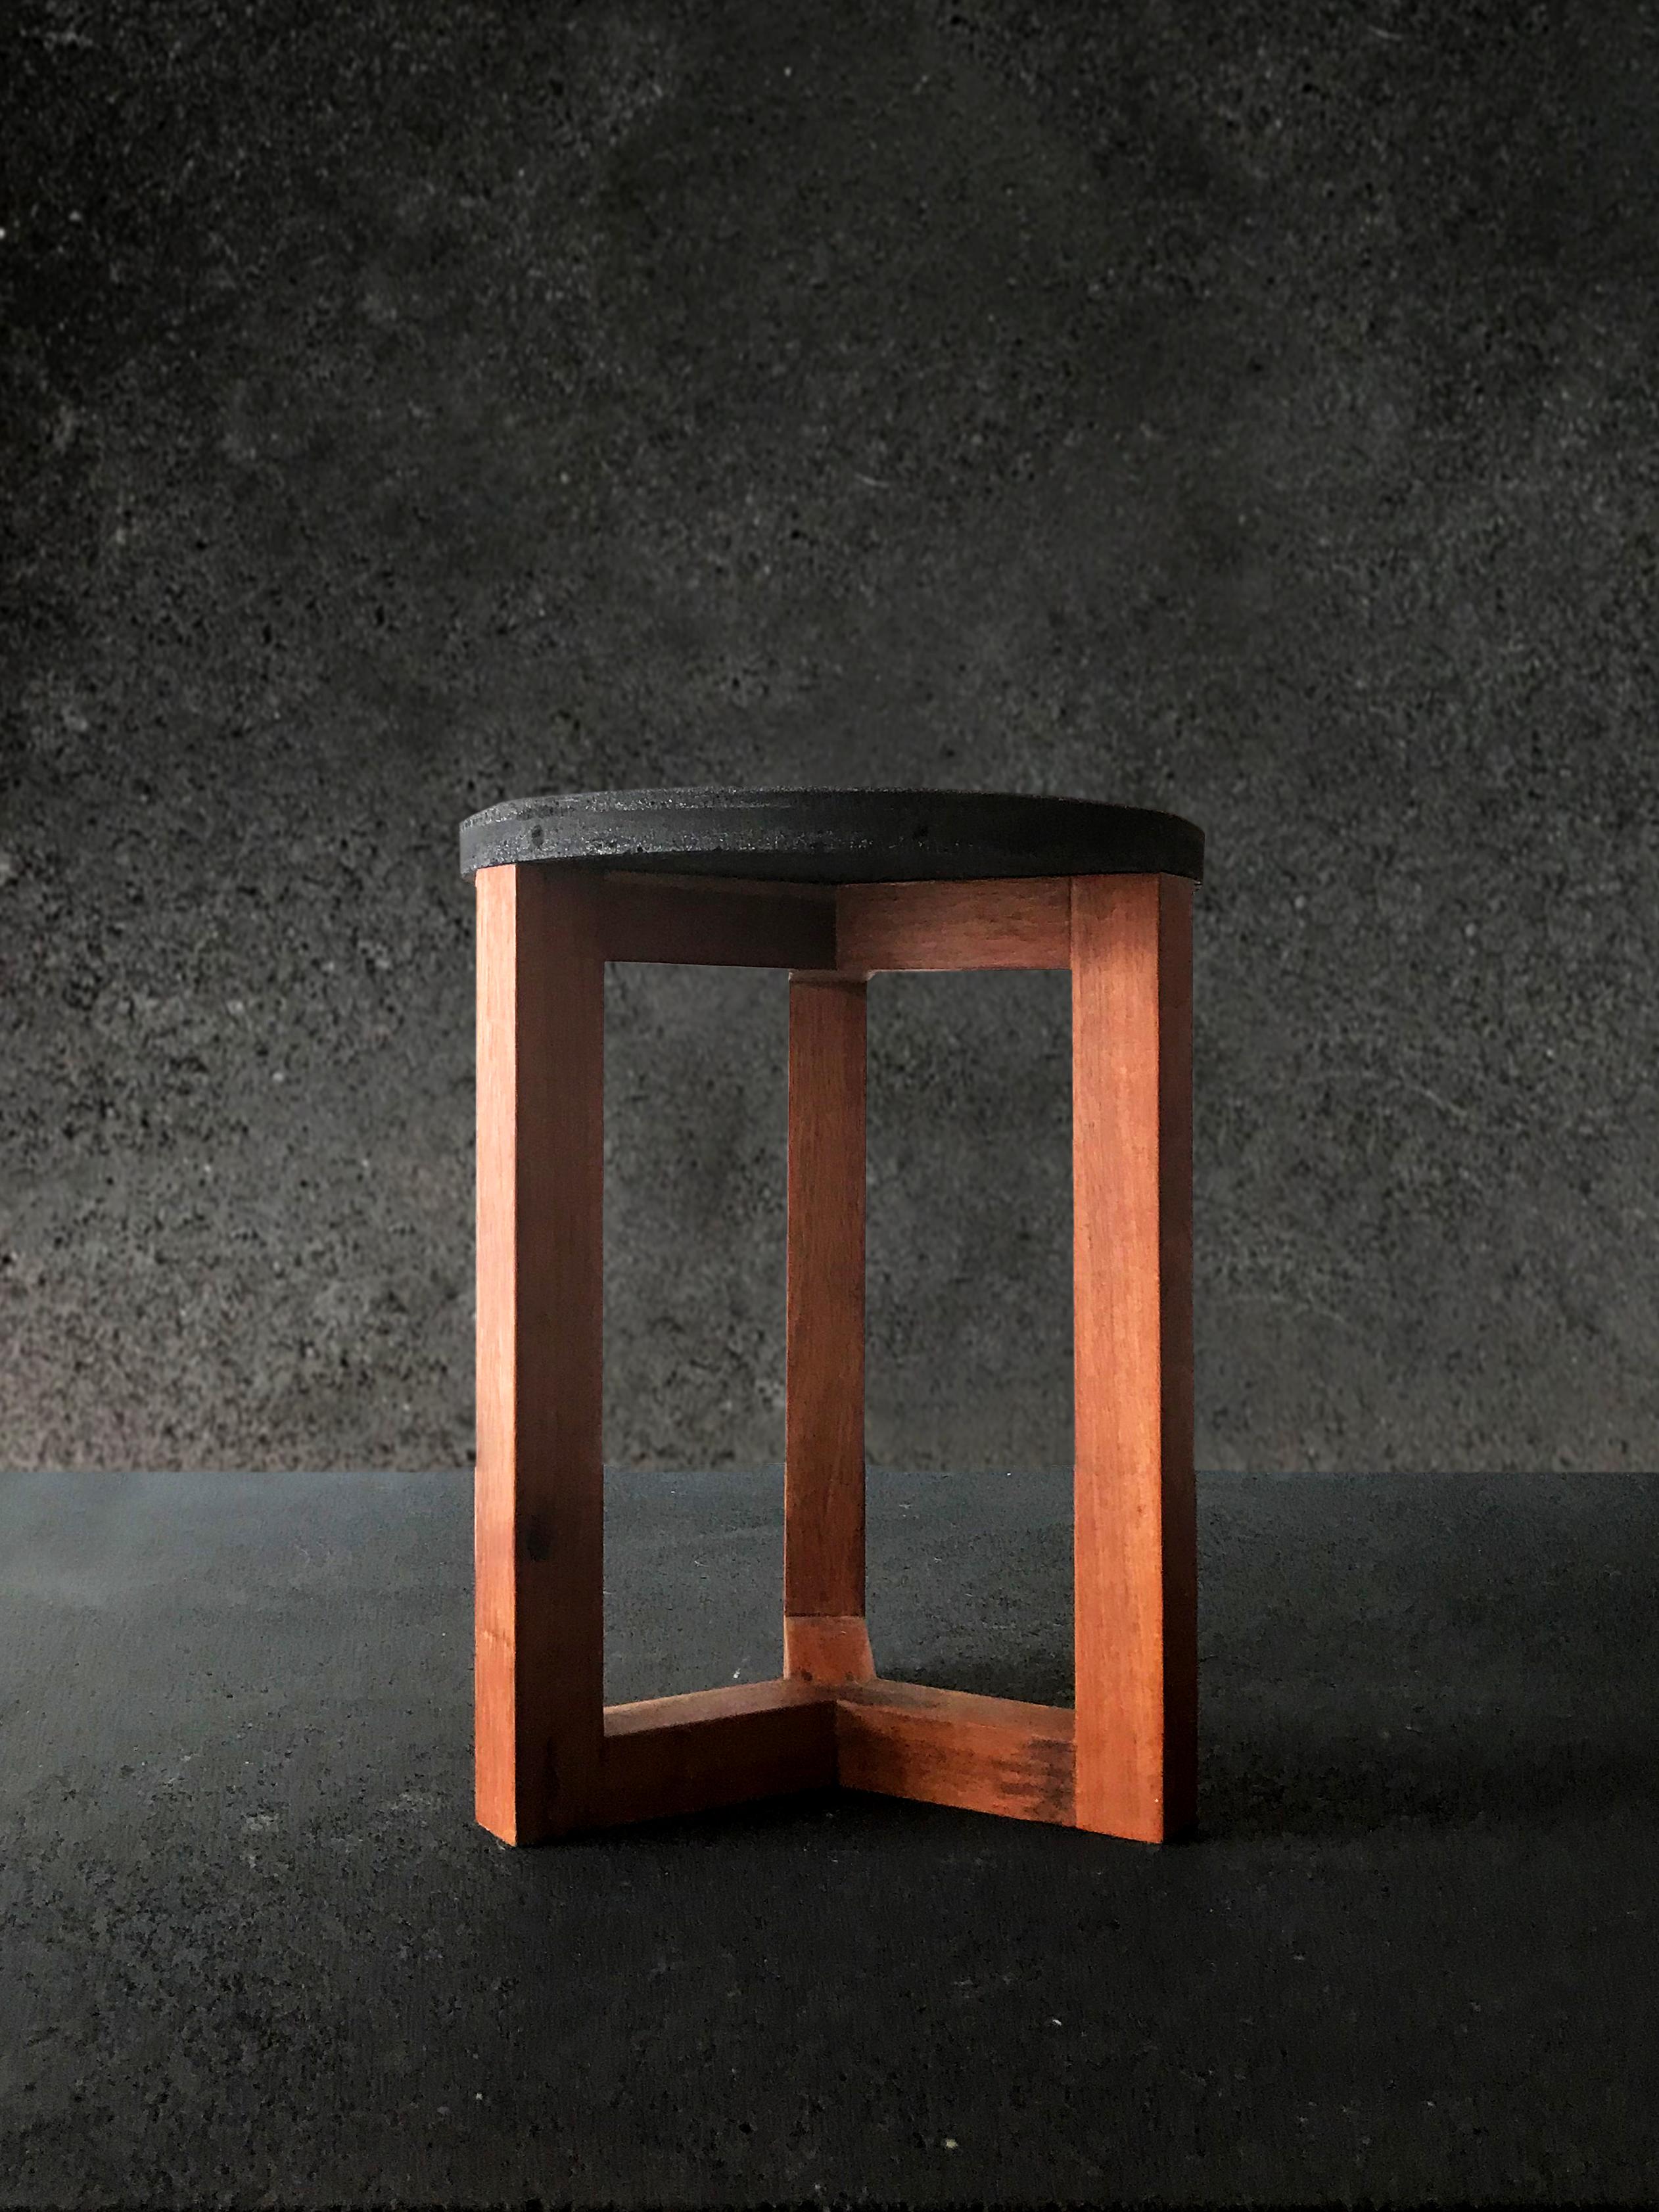 Mexican contemporary design wood and concrete stool. The versatility of this piece allows the stool to be used both for seating or as a lateral table. A collaboration with MDC.